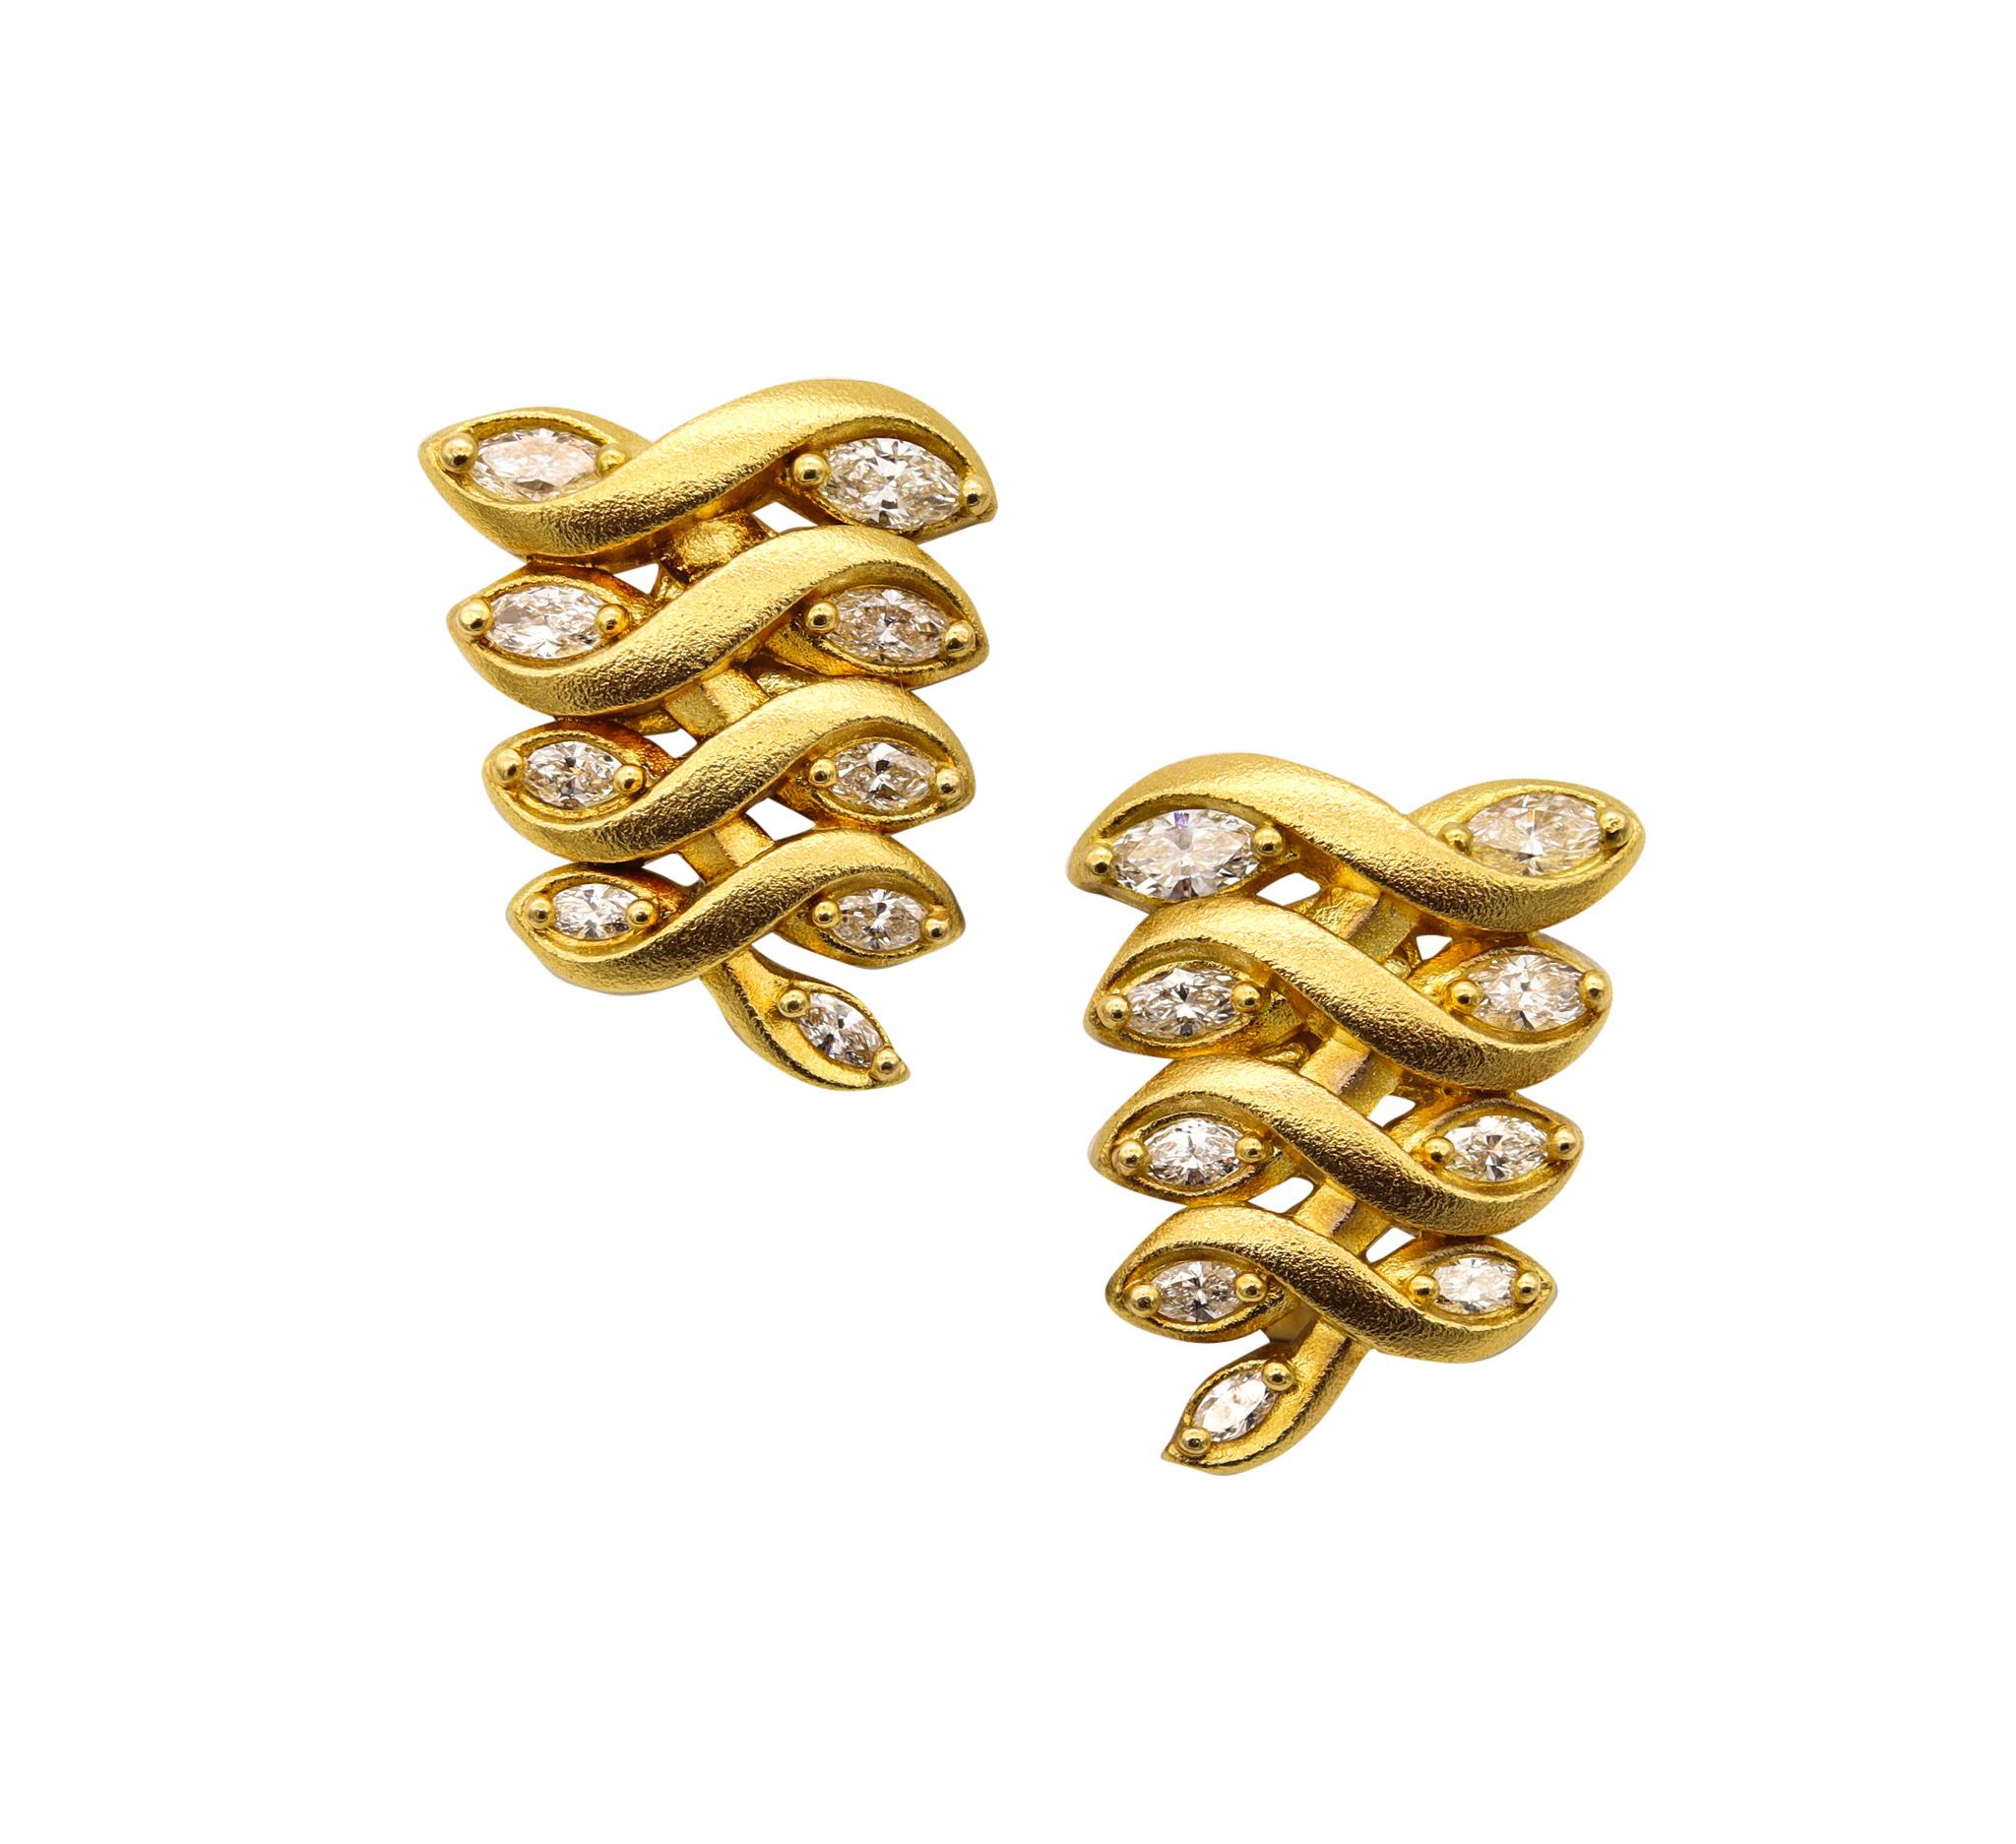 Convertible Earrings designed by Paul Morelli.

Beautiful pieces, created in the Philadelphia United States at the jewelry atelier of Paul Morelli. These gorgeous pair of earrings has been crafted in solid yellow gold of 18 karats, with frosted